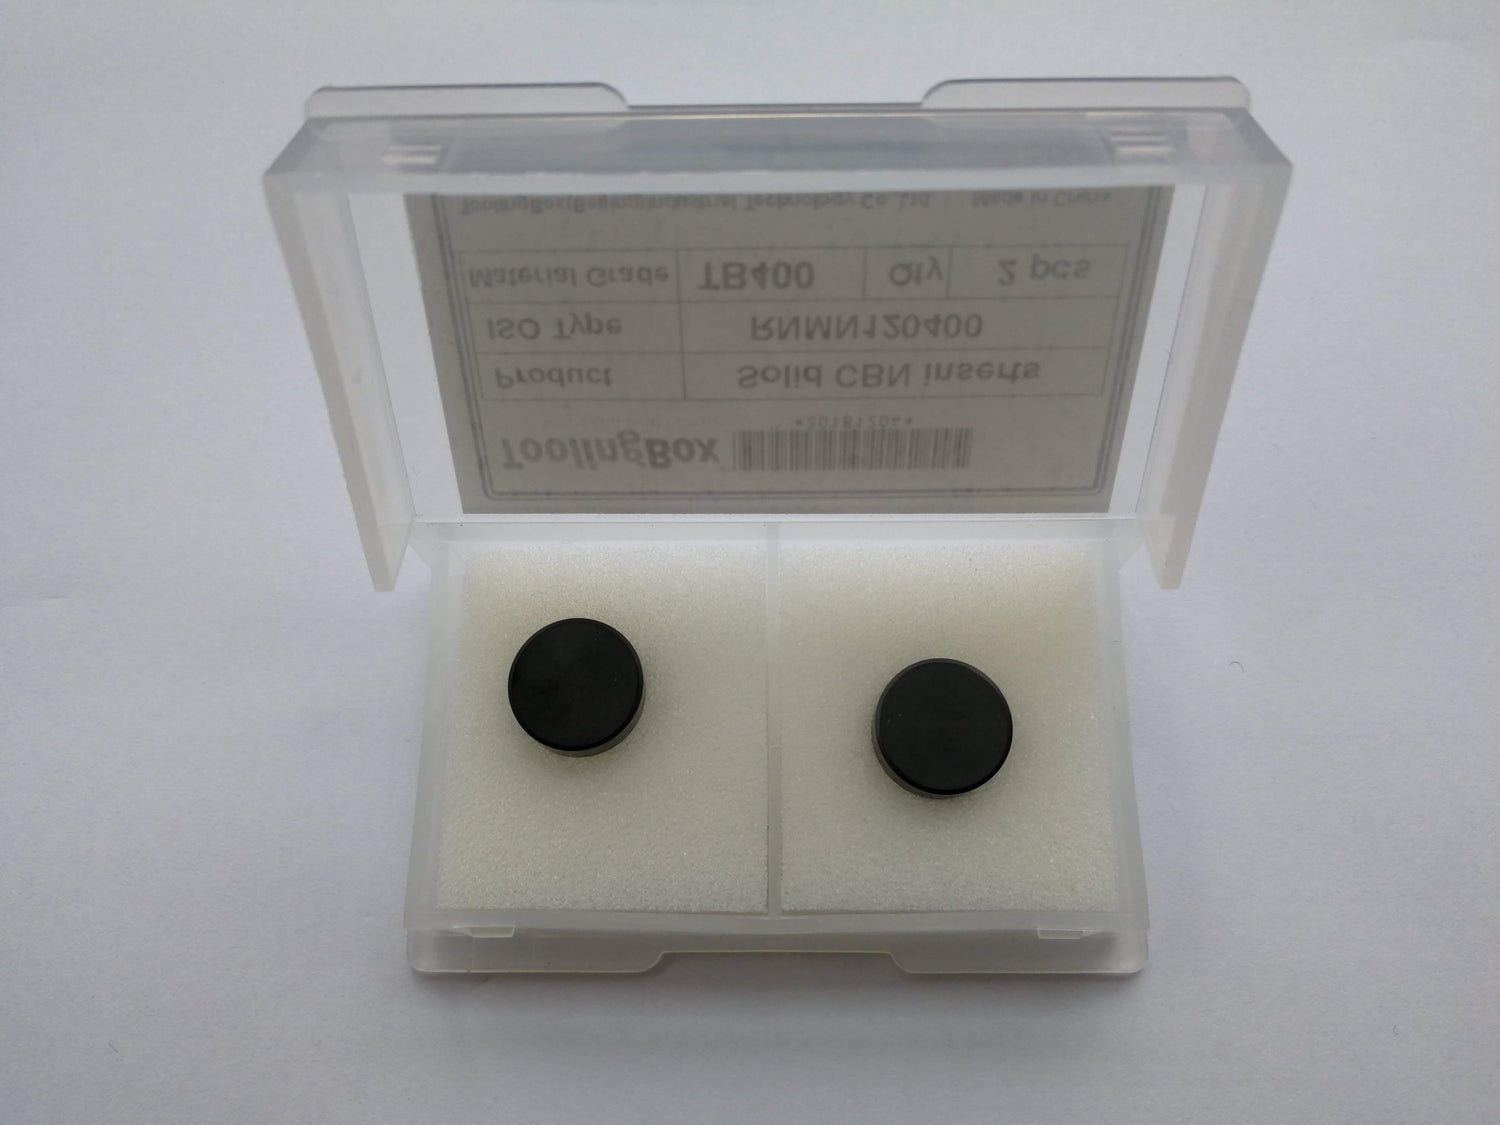 2pcs packing Solid CBN insert RNMN090300 TB100 for gray cast iron